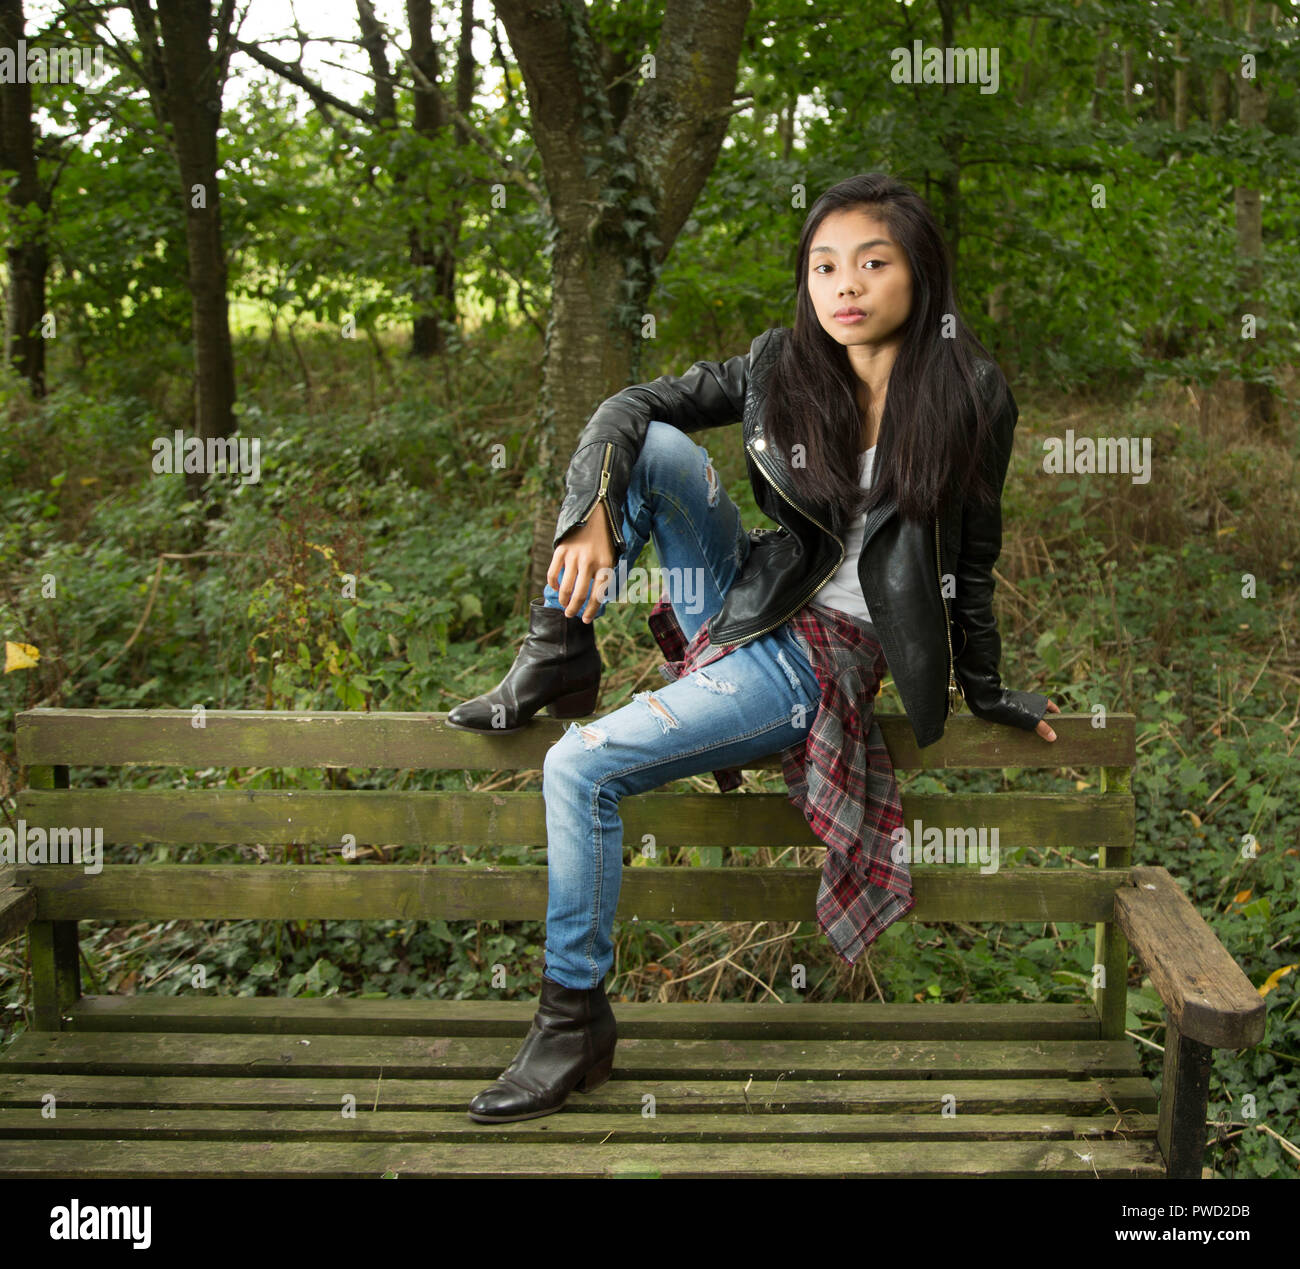 Young Filipino woman in black leather jacket in woods/forest setting sitting on old moss covered wooden bench in urban clothes. and jeans. Stock Photo